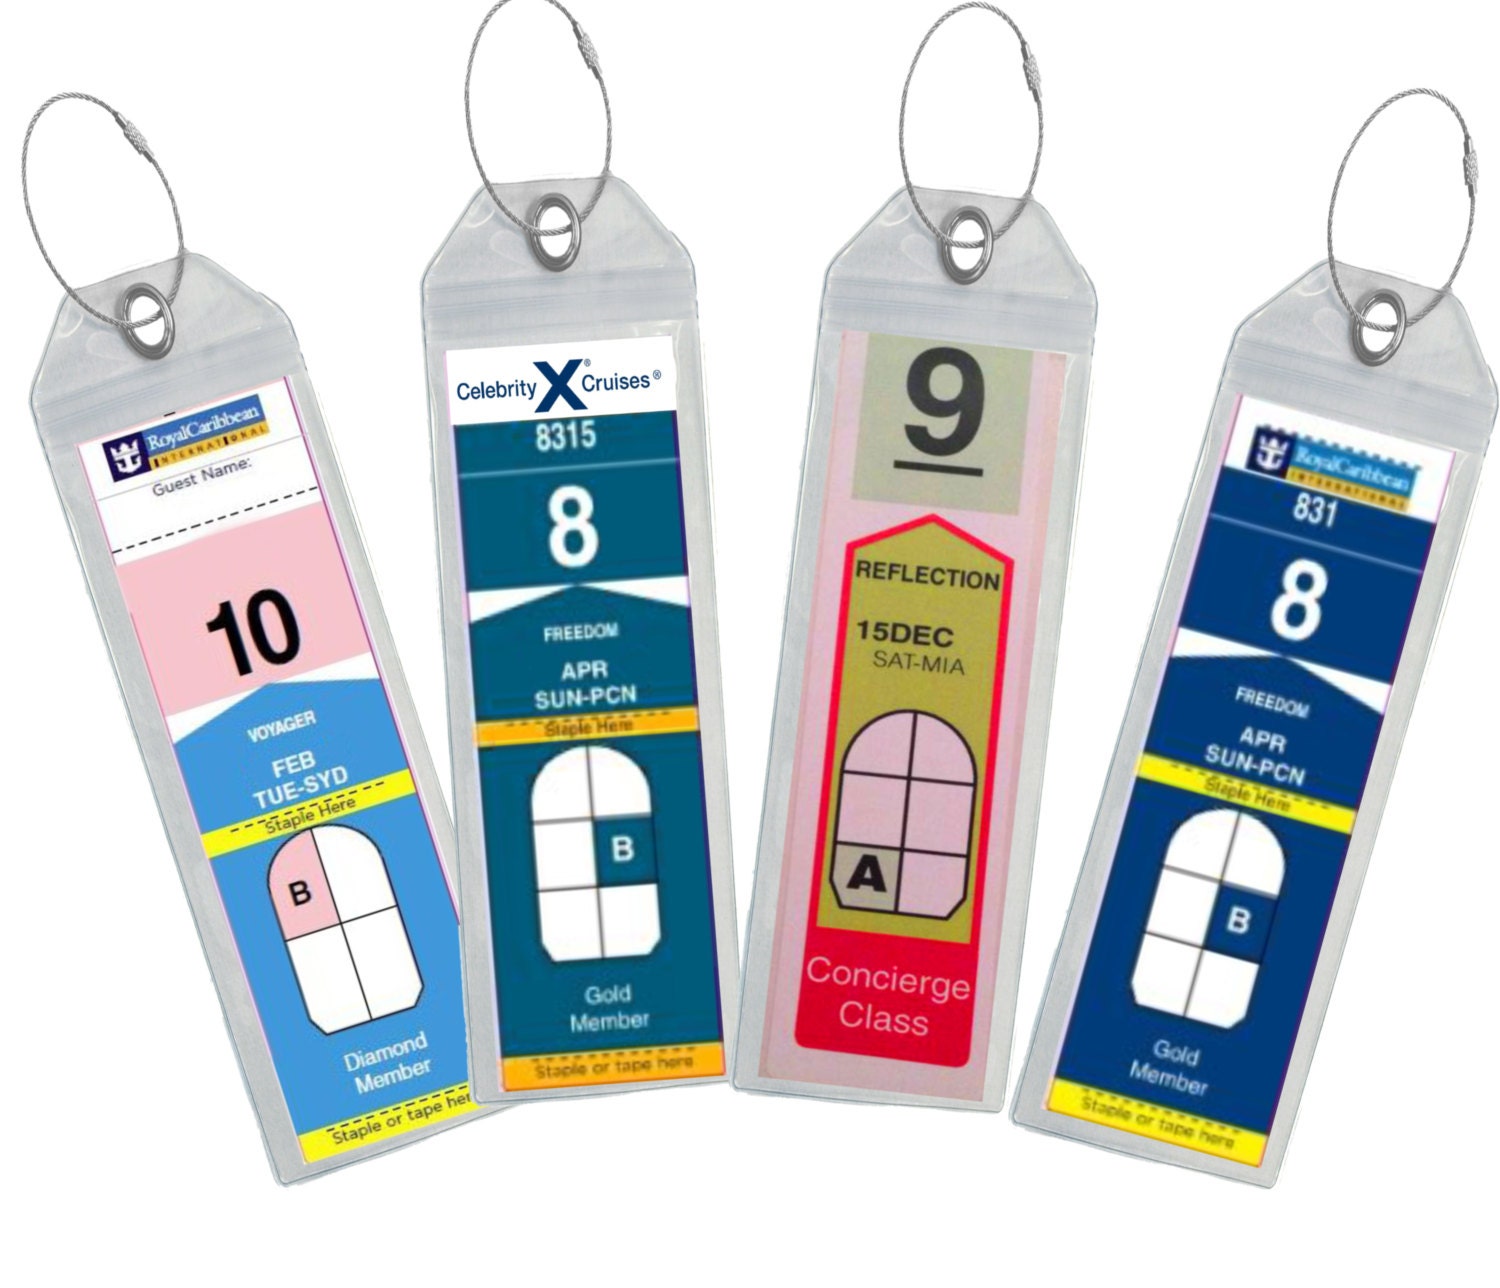 luggage tag holders for cruises